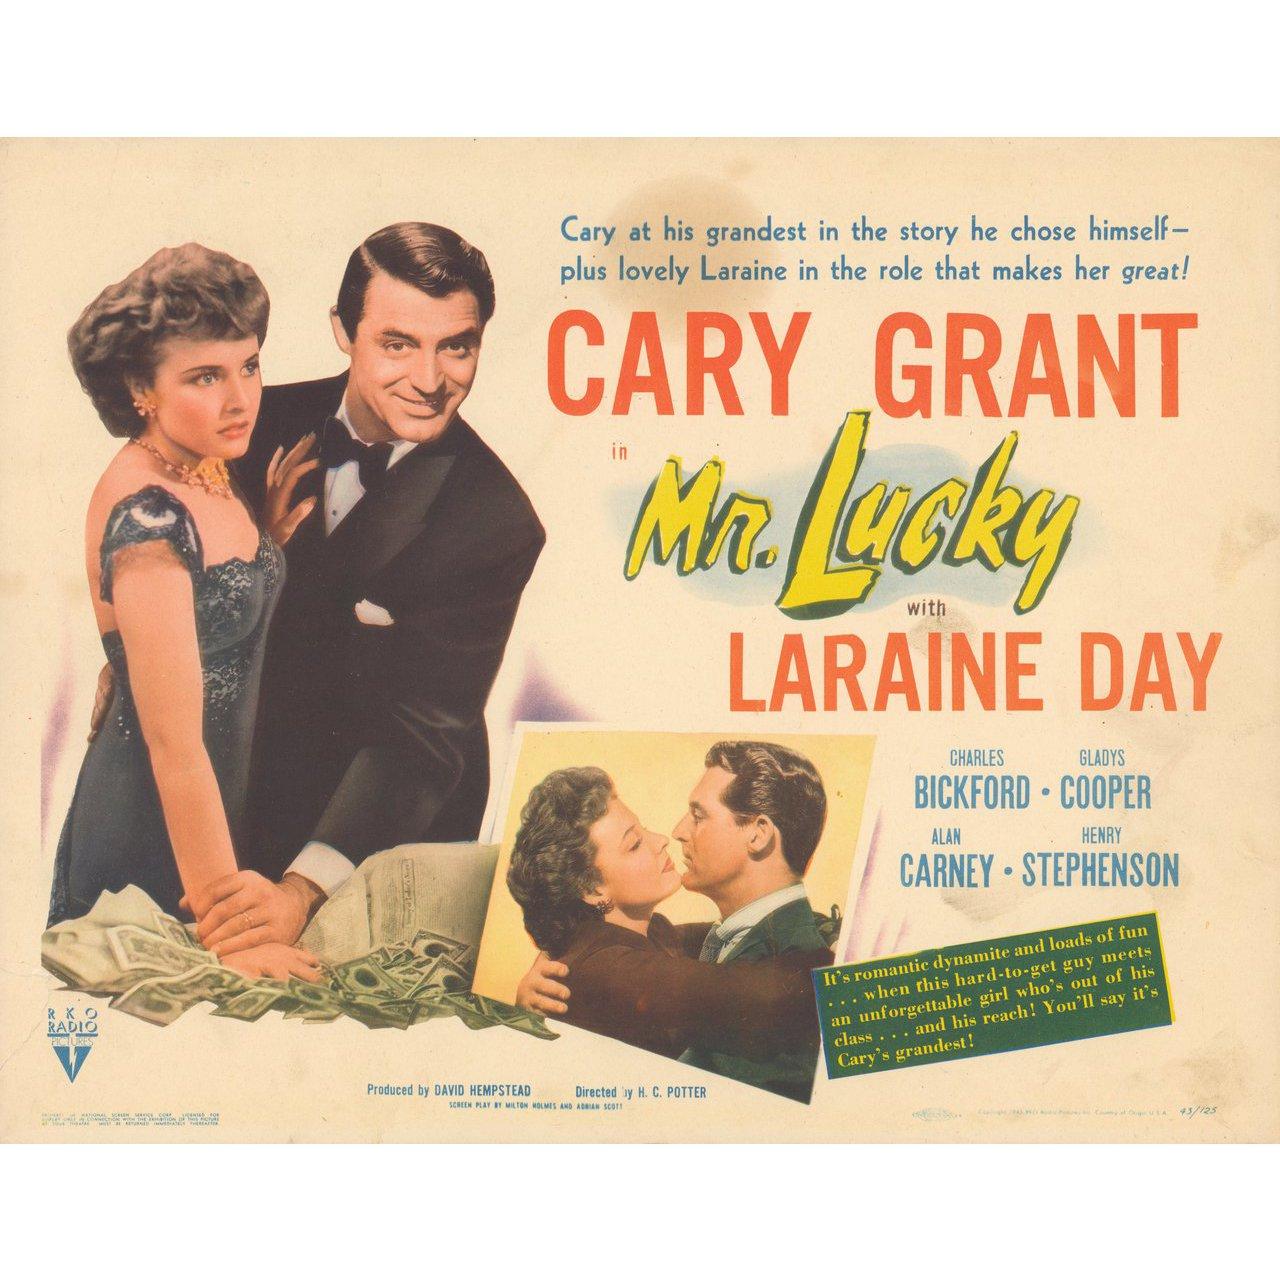 Original 1943 U.S. title card for the film Mr. Lucky directed by H.C. Potter with Cary Grant / Laraine Day / Charles Bickford / Gladys Cooper. Very Good-Fine condition, paper tape on rear. Please note: the size is stated in inches and the actual